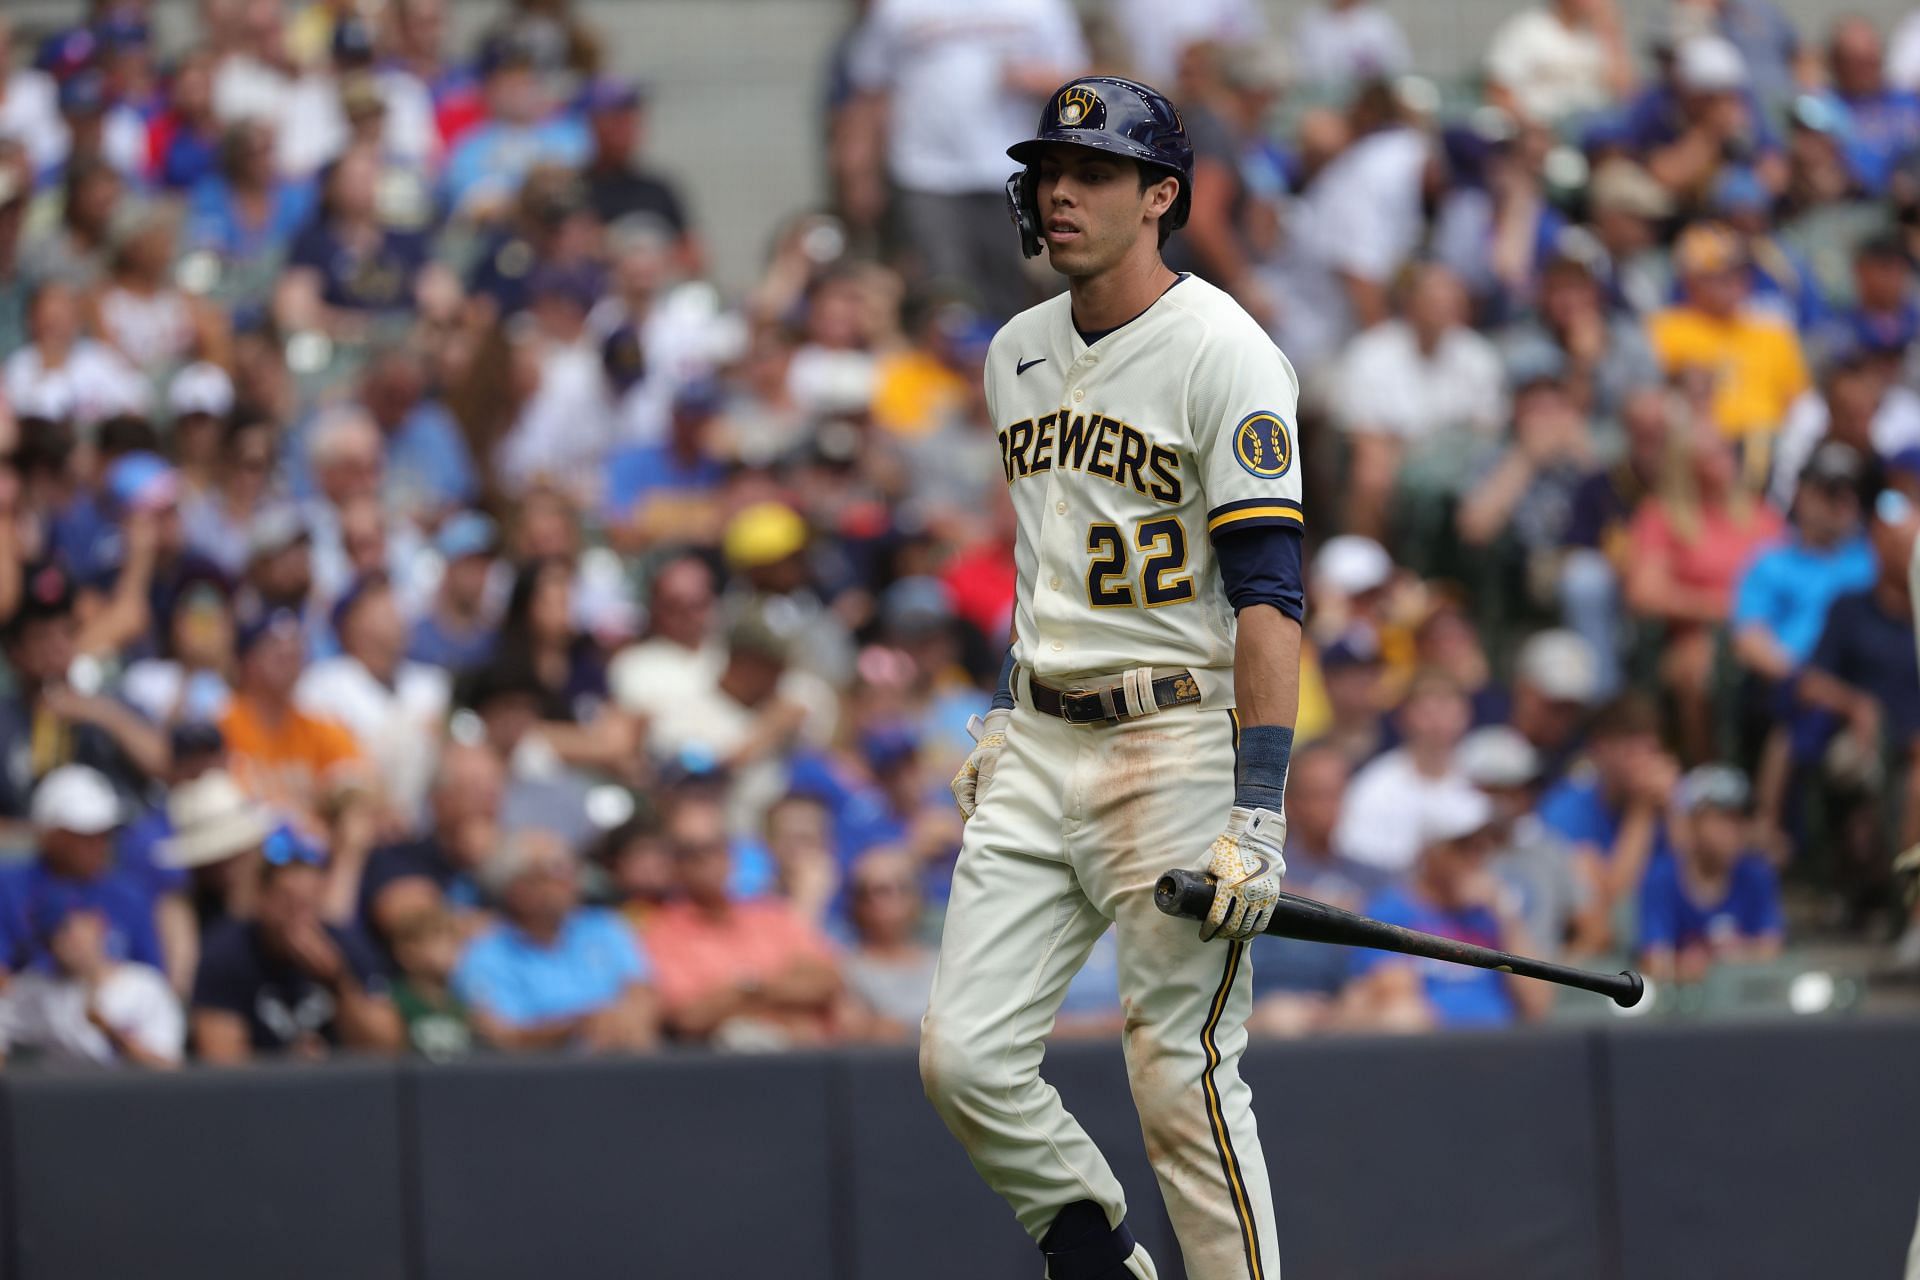 Christian Yelich during a Chicago Cubs v Milwaukee Brewers game.